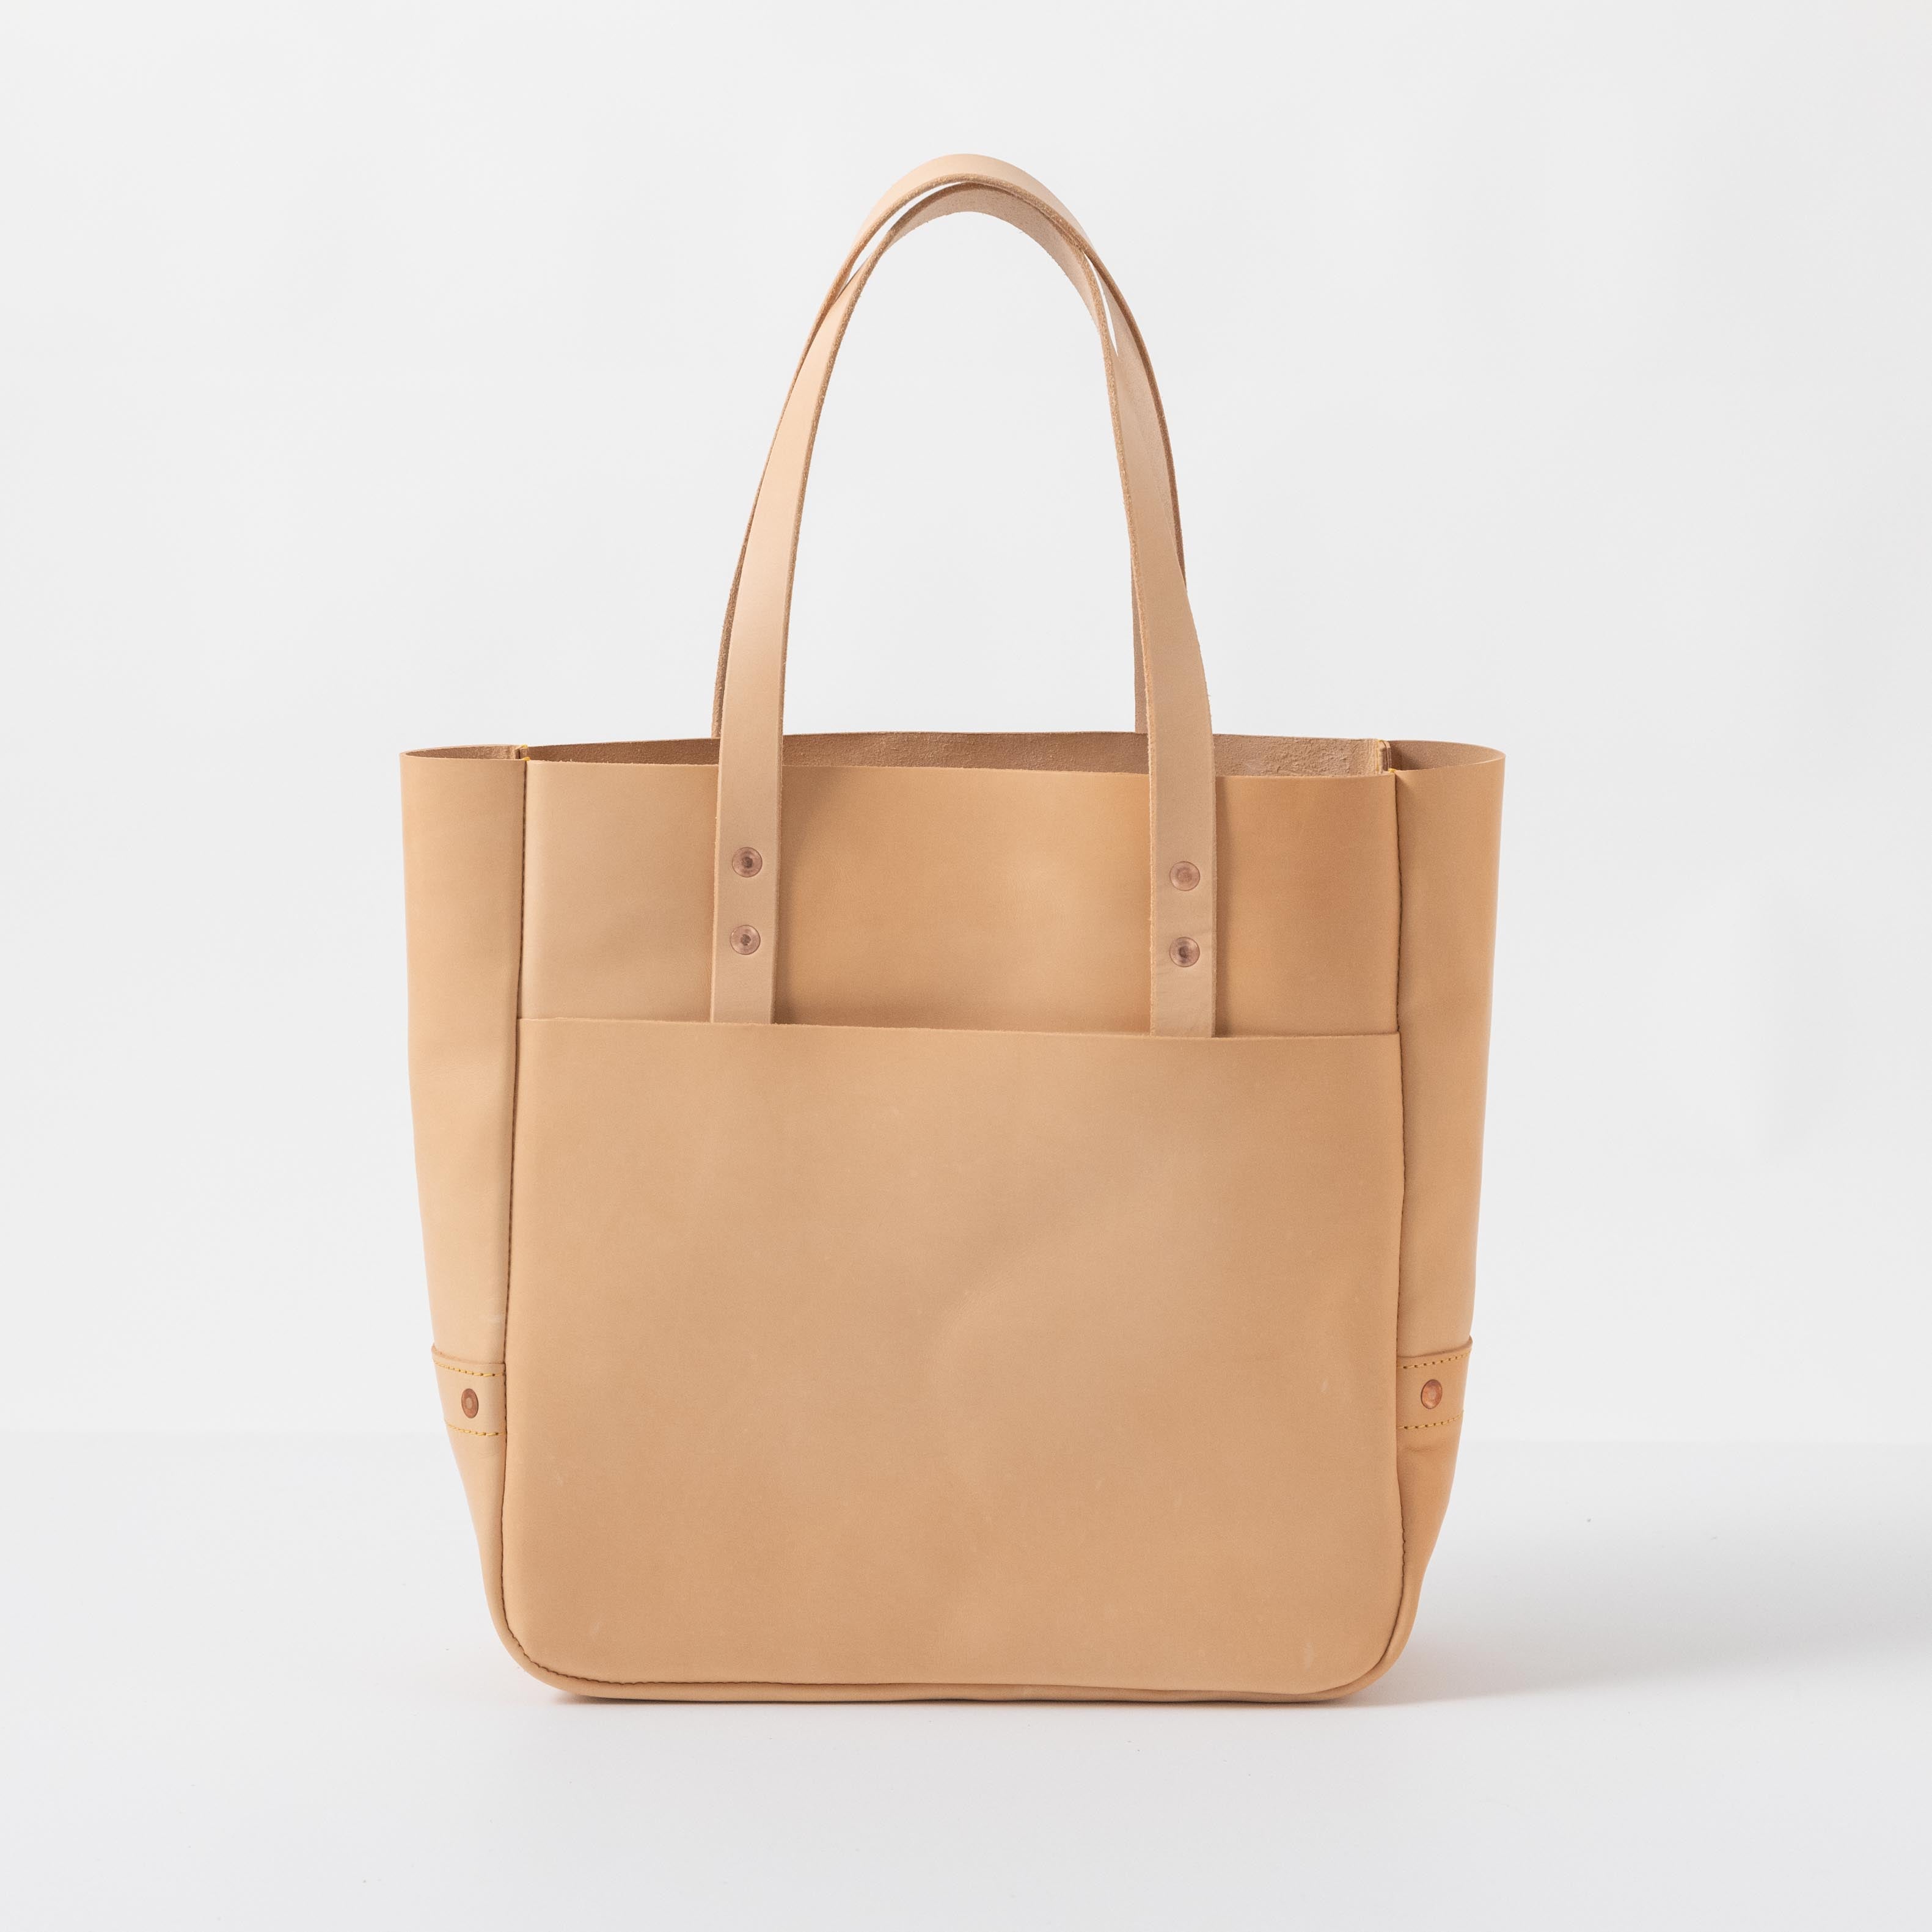 Vegetable Tanned Carryall Tote